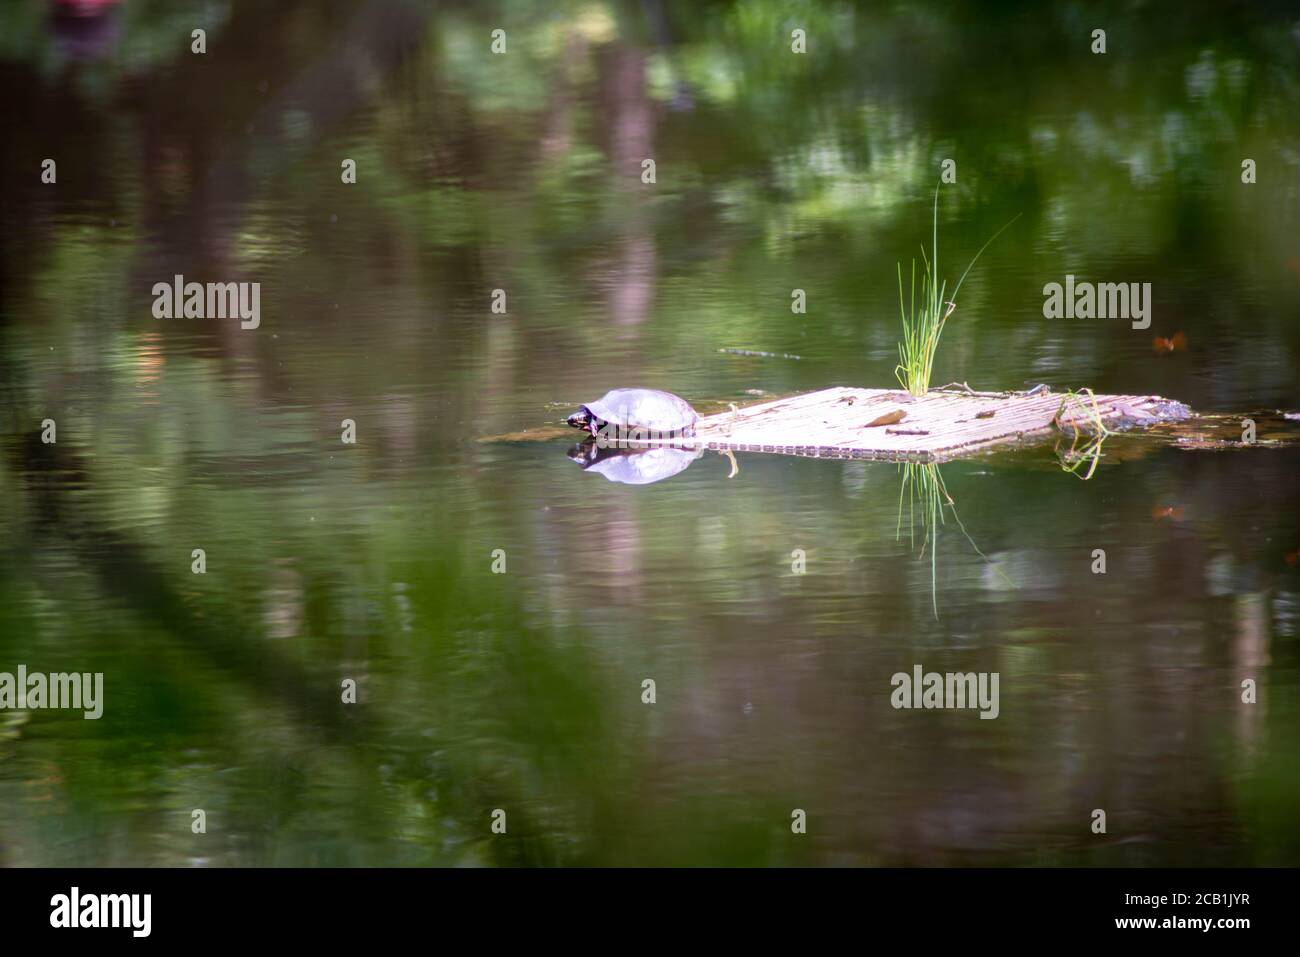 A turtle on a wooden raft sees his reflection in the surreal surface of a woodland pond. Green foliage reflected in the rippling motion of the water. Stock Photo